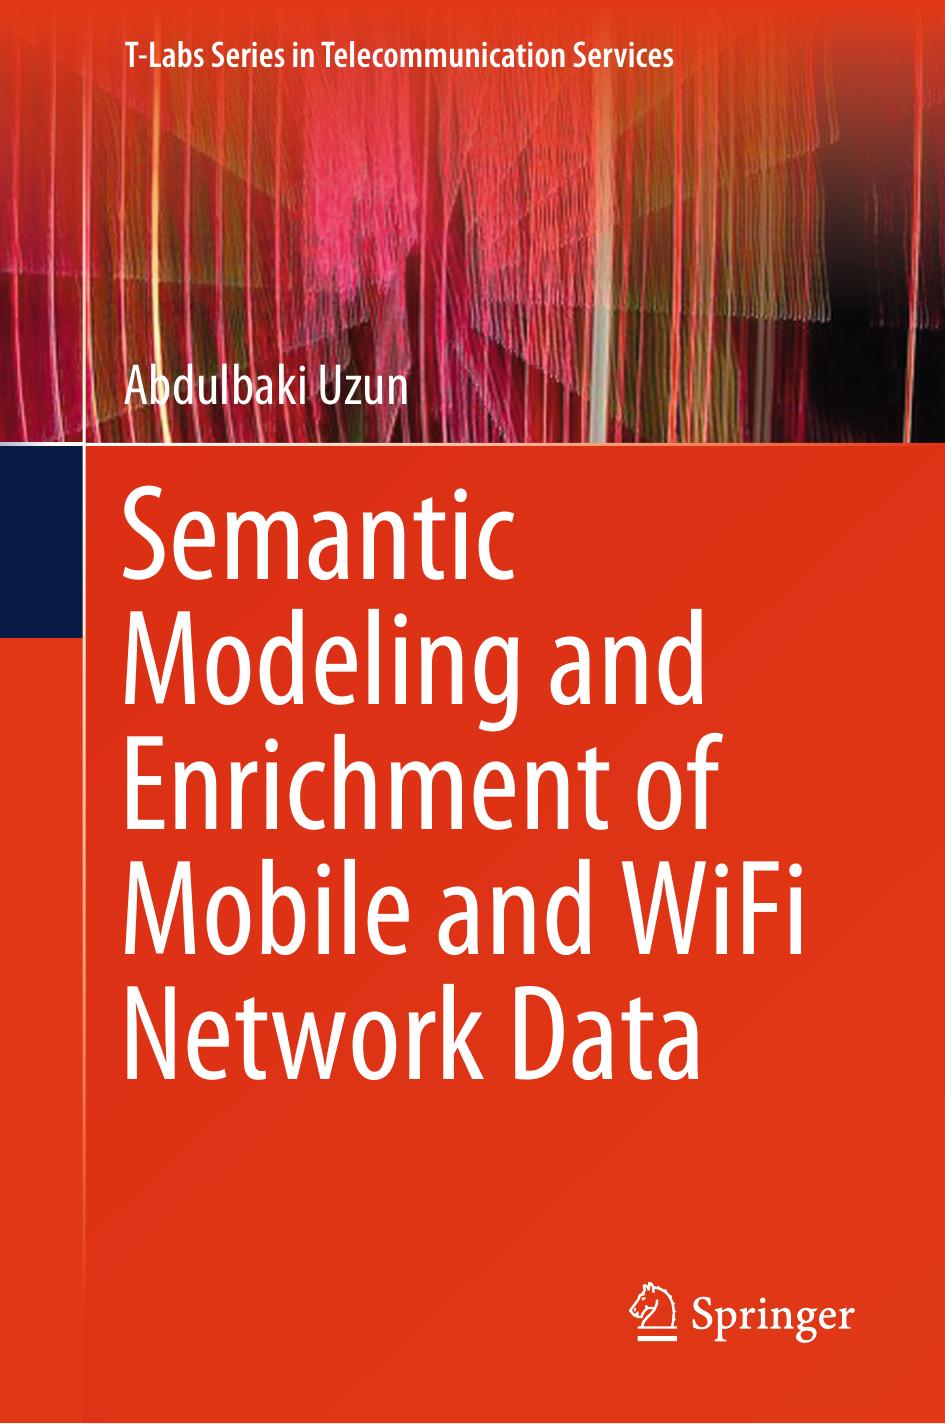 Semantic Modeling and Enrichment of Mobile and WiFi Network Data by Abdulbaki Uzun